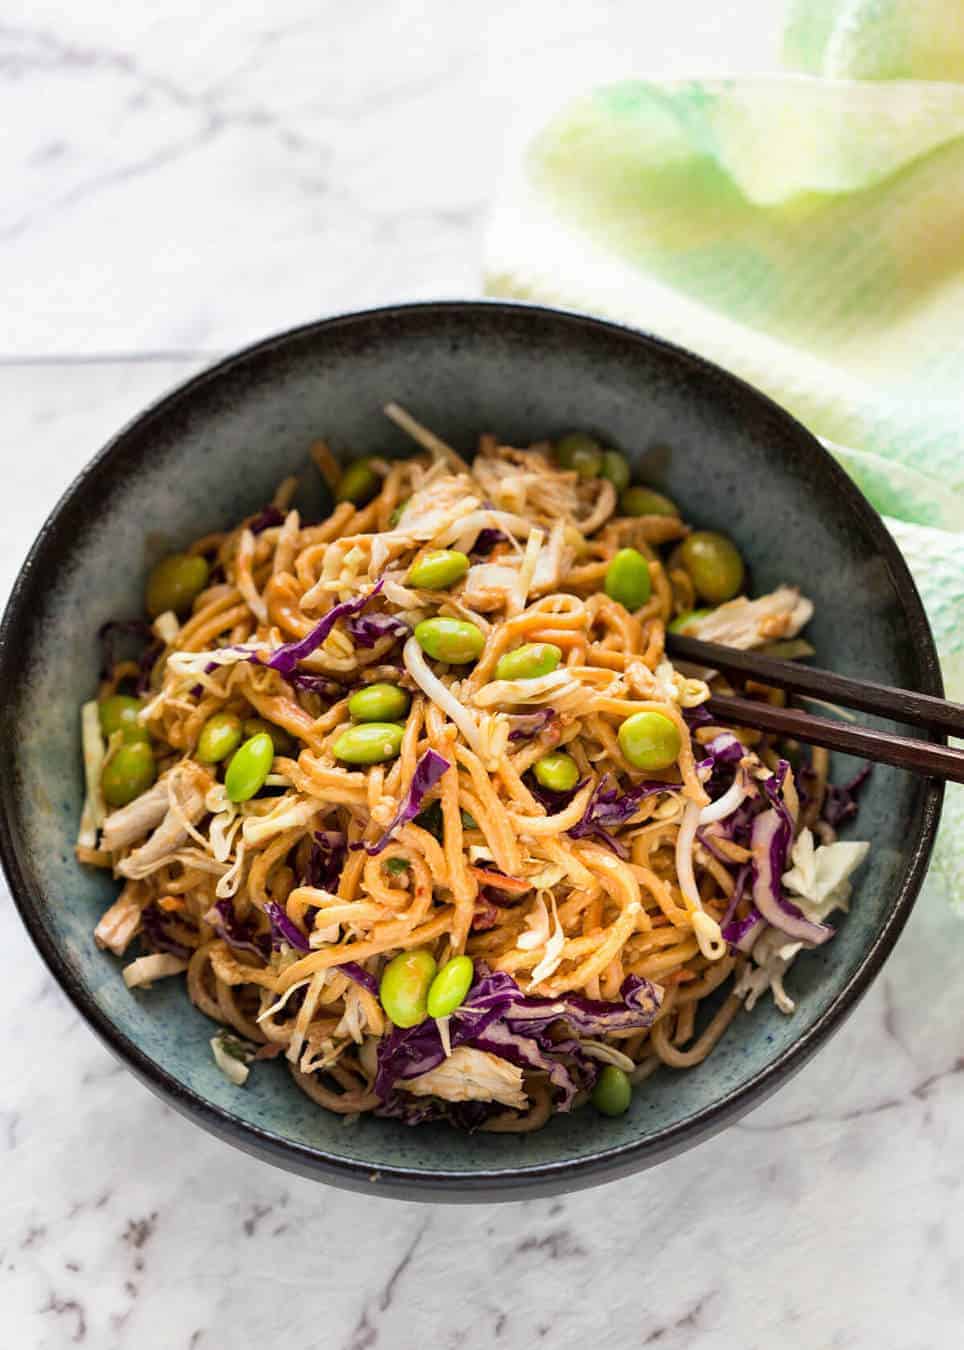 Sesame Noodles - noodles tossed with a wicked Asian Sesame Peanut Dressing. Serve these as Cold Sesame Noodles or warm. www.recipetineats.com